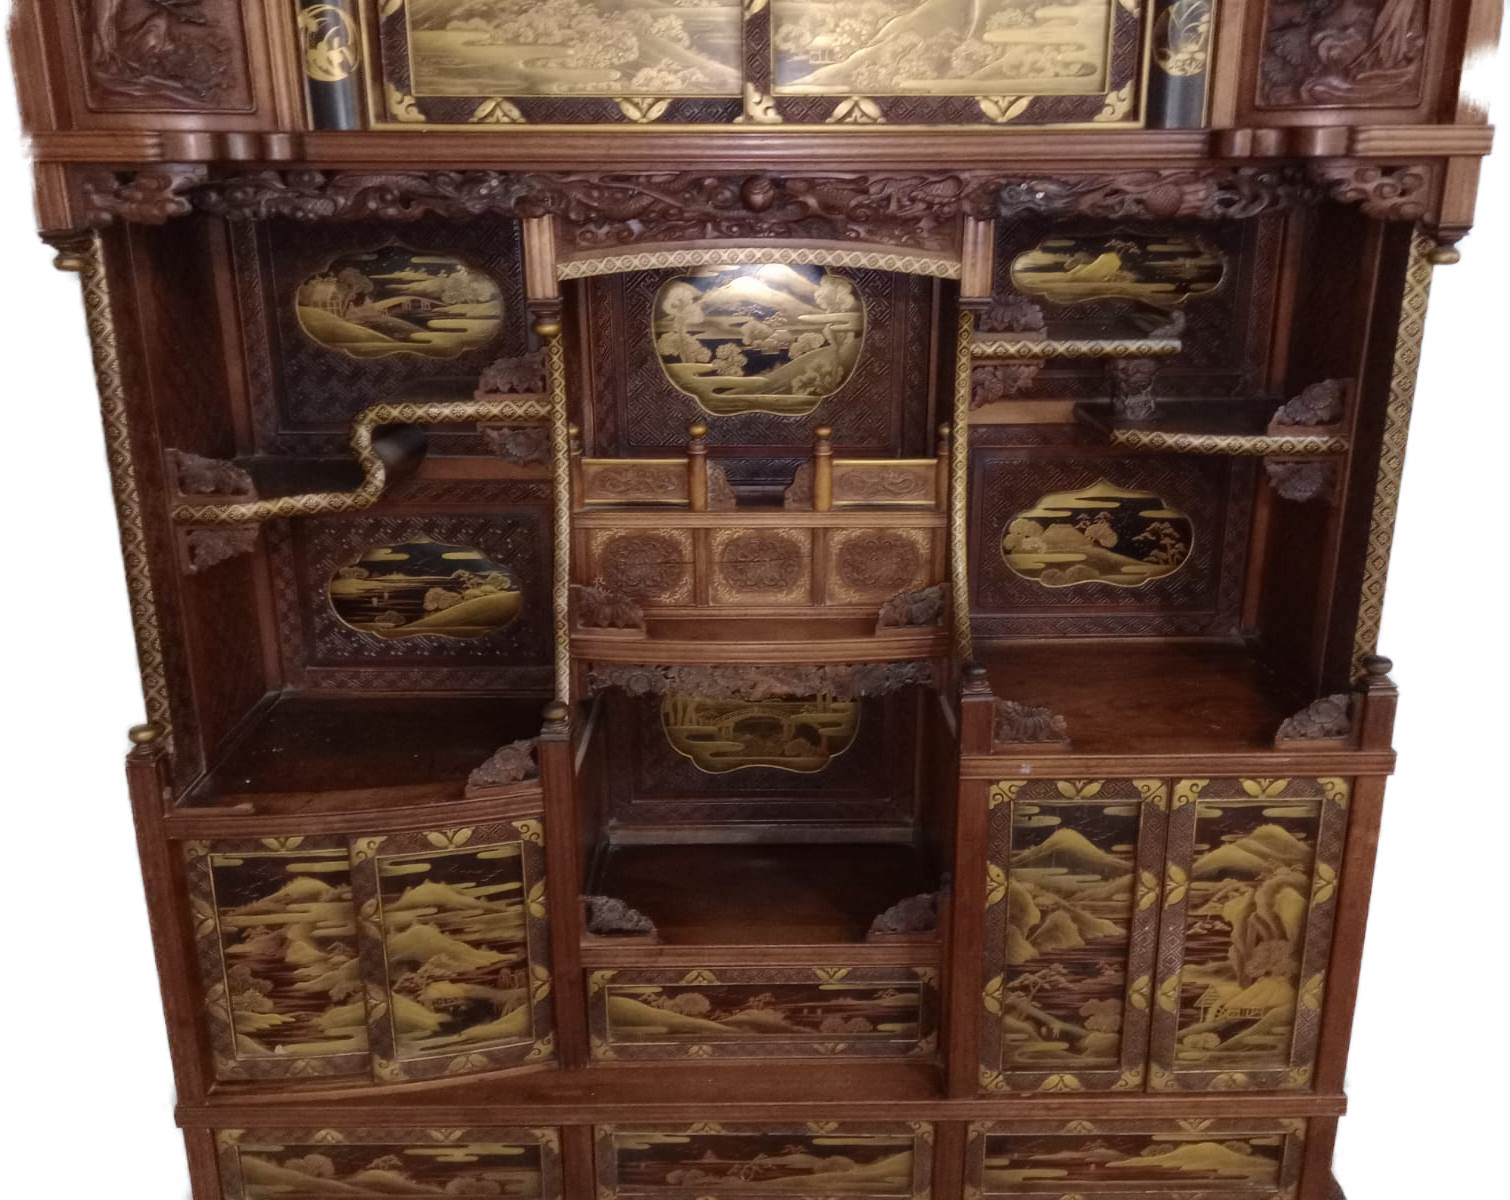 LATE 19TH CENTURY JAPANESE MEIJI LACQUER BOOKCASE CABINET - Image 3 of 10